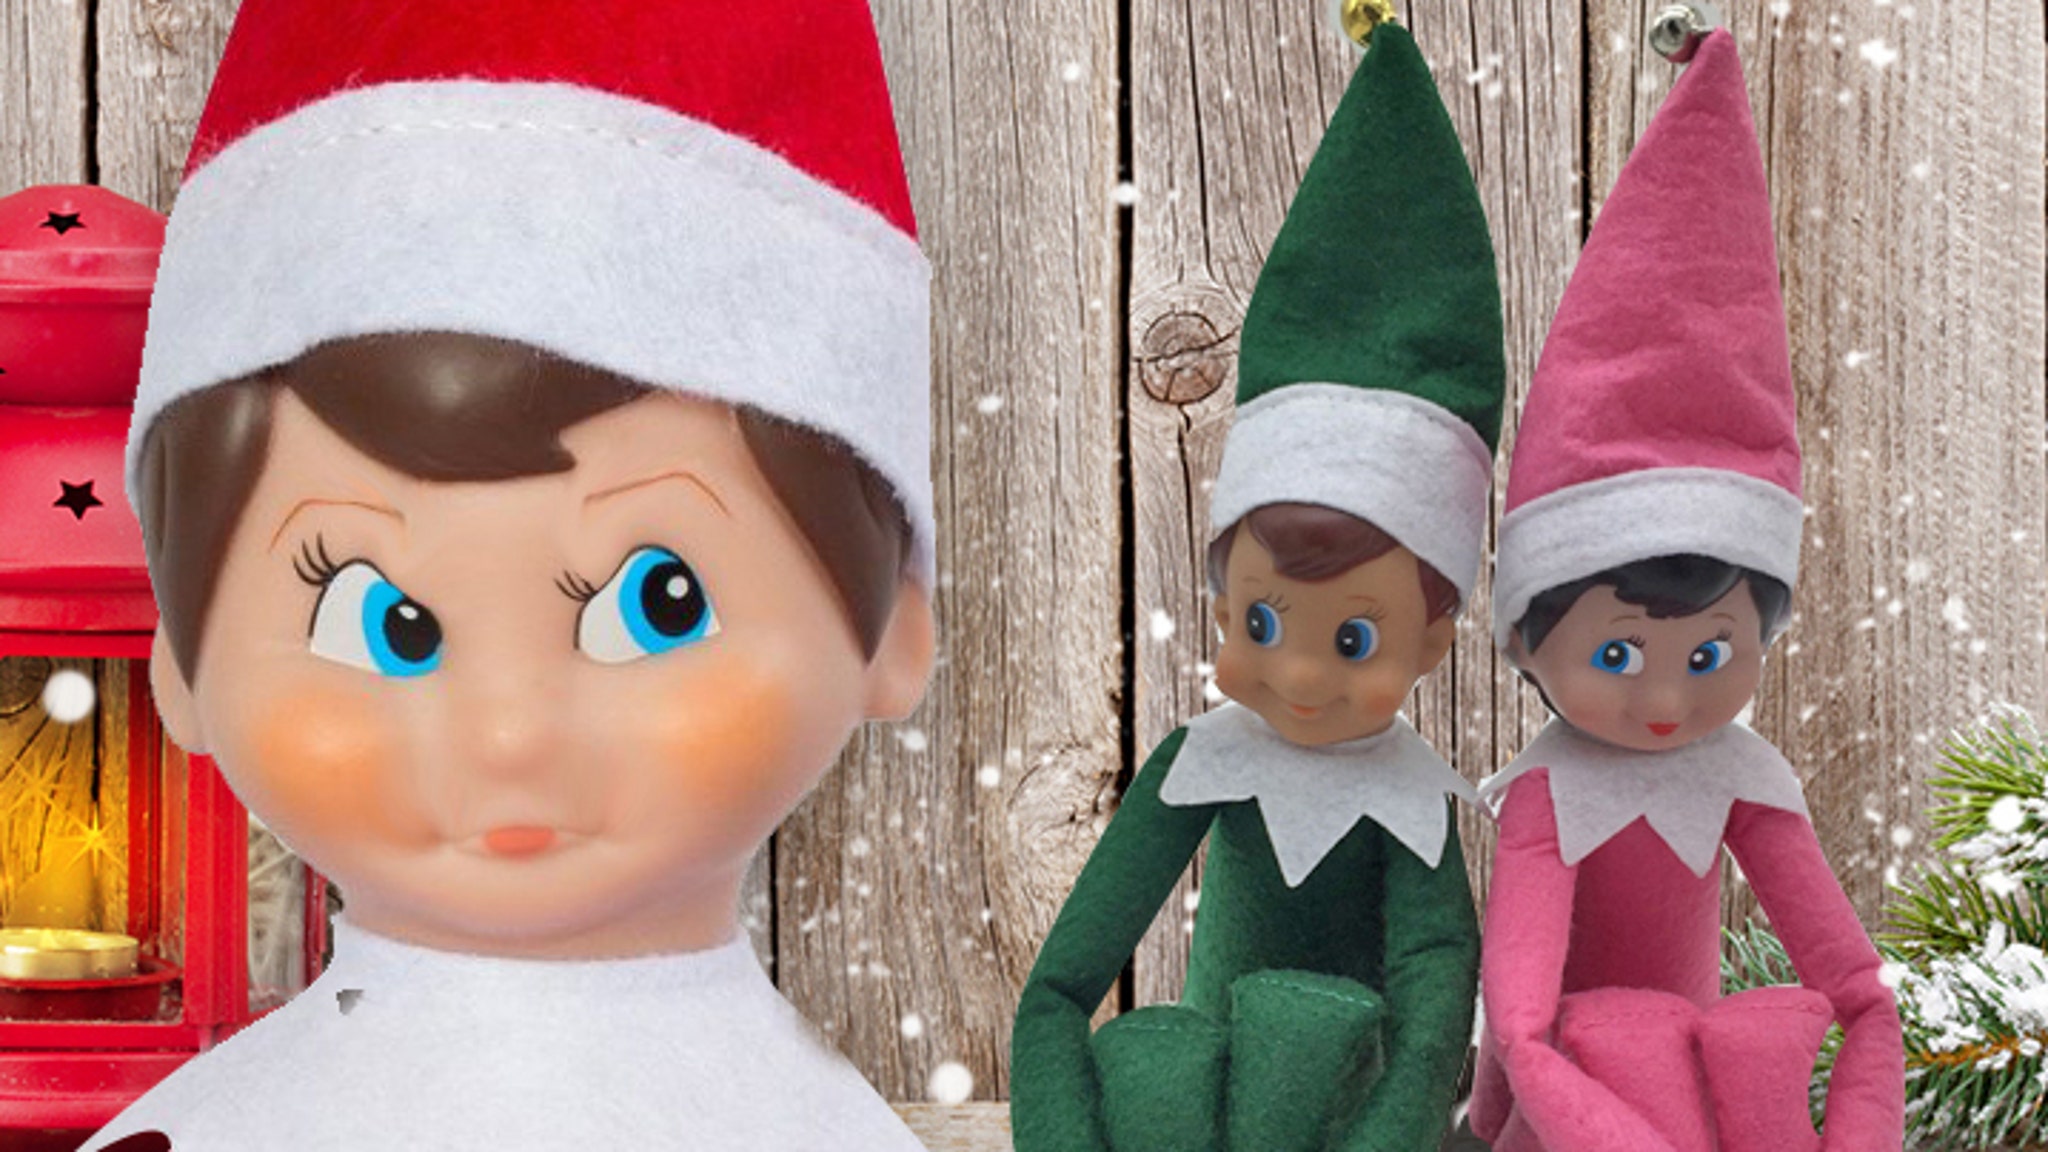 'Elf on the Shelf' Author Sues Over Knockoff Dolls